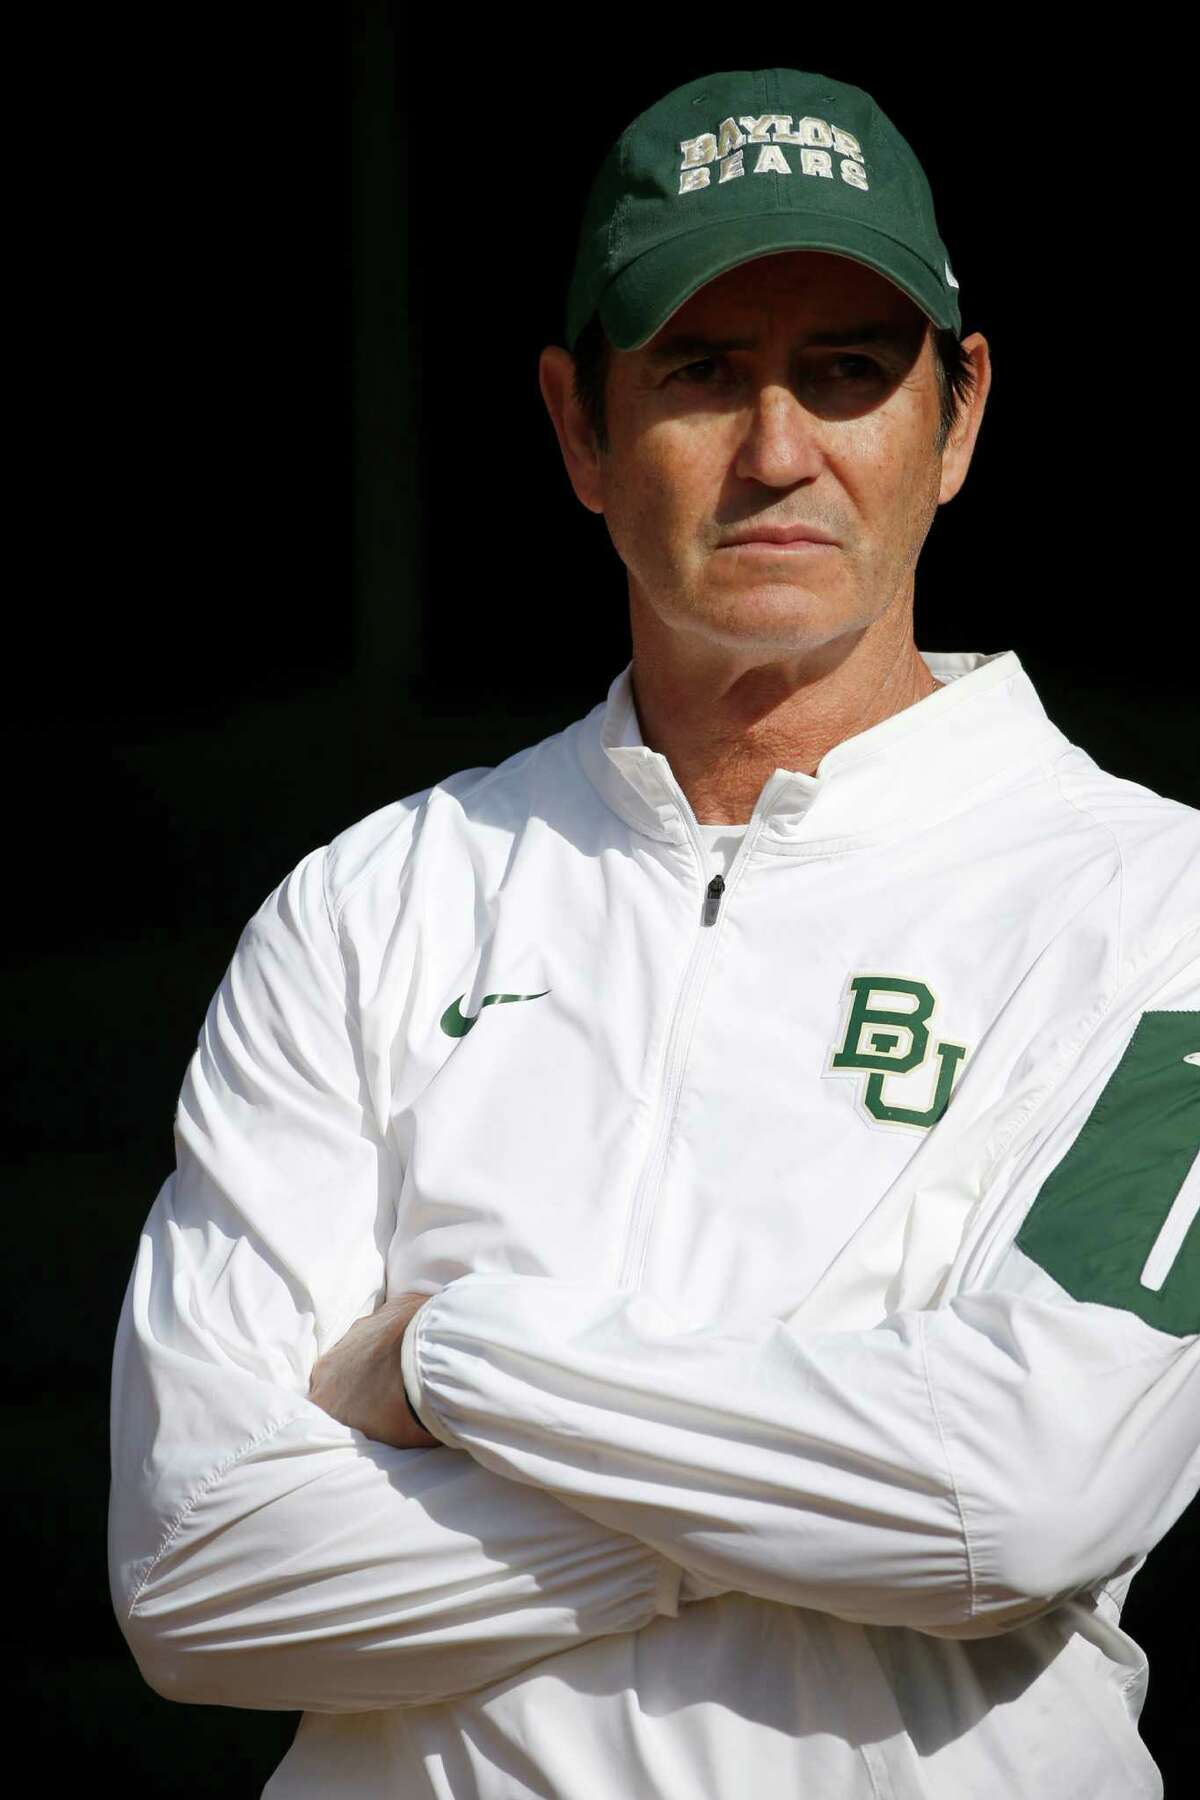 Then-head coach Art Briles of the Baylor Bears waits in the tunnel before the Bears take on the Texas Longhorns at McLane Stadium on Dec. 5, 2015 in Waco.